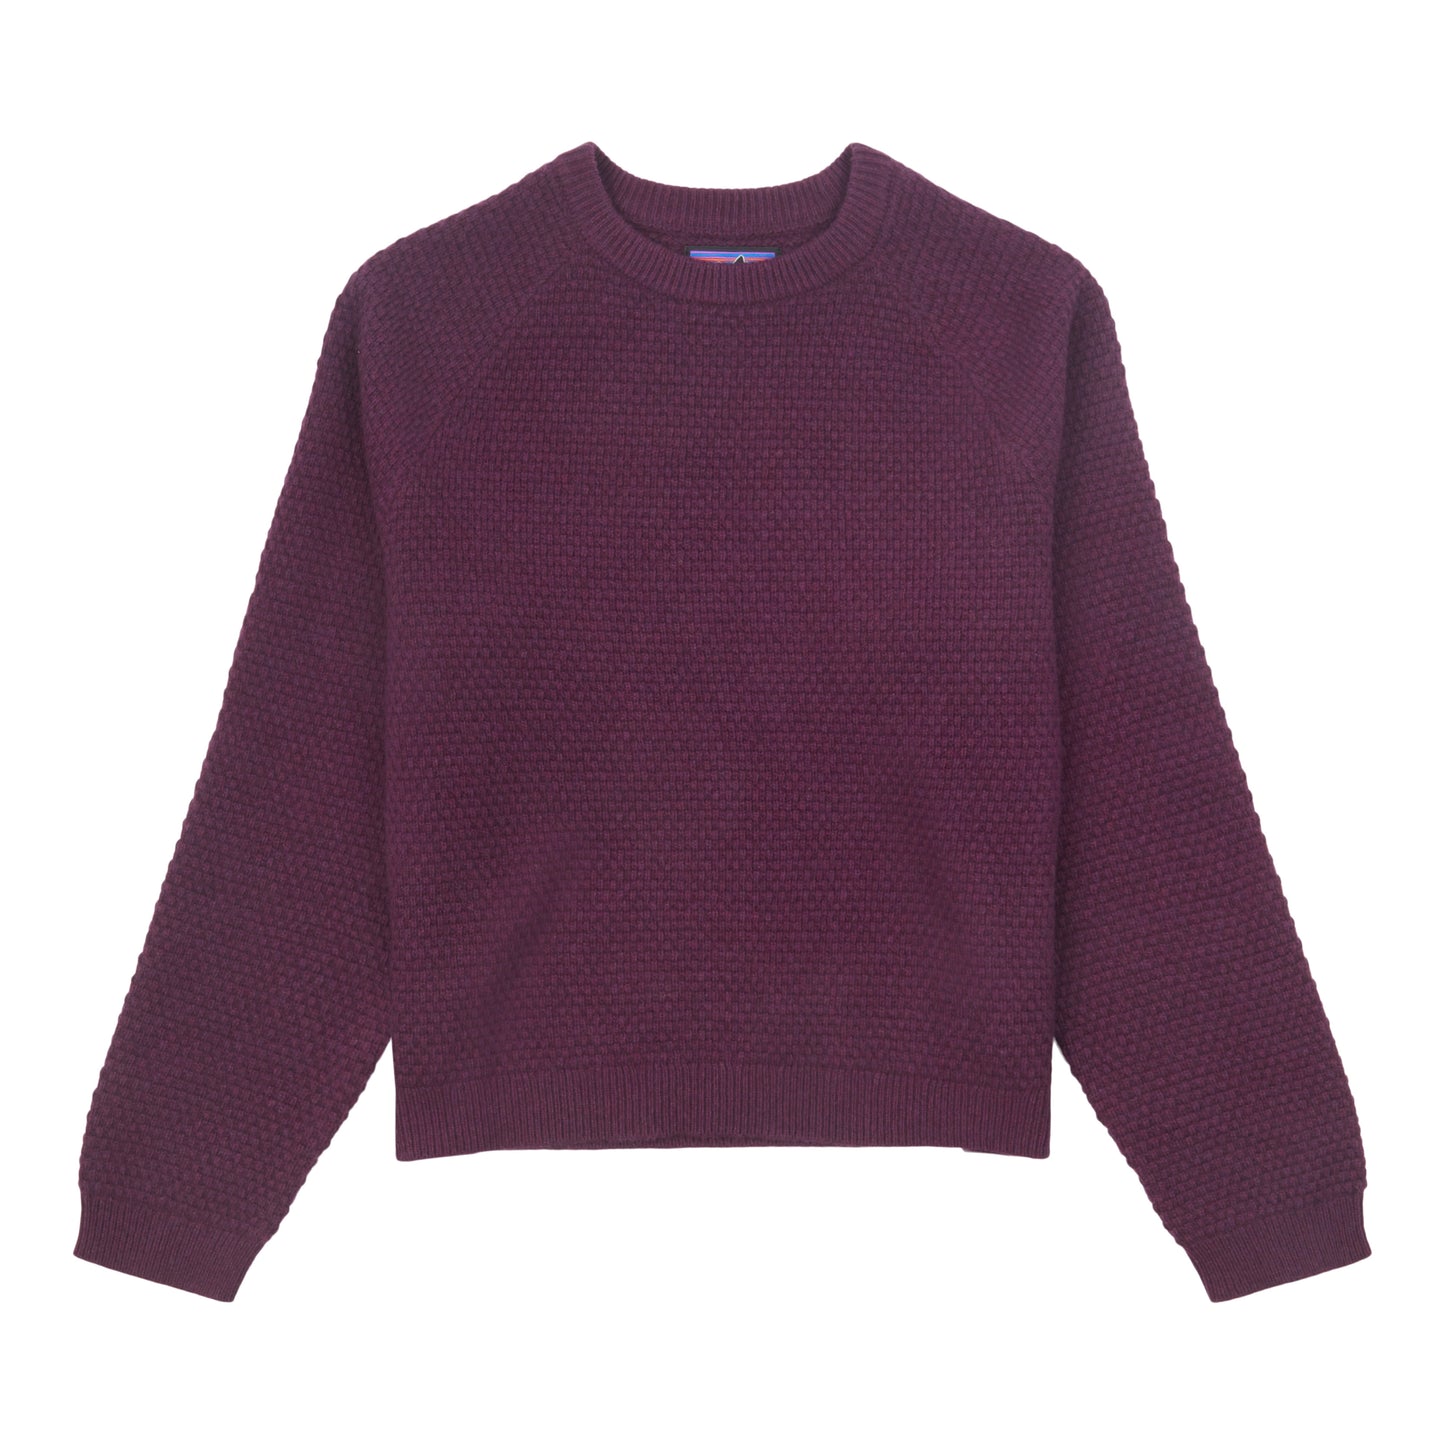 Women's Recycled Cashmere Top